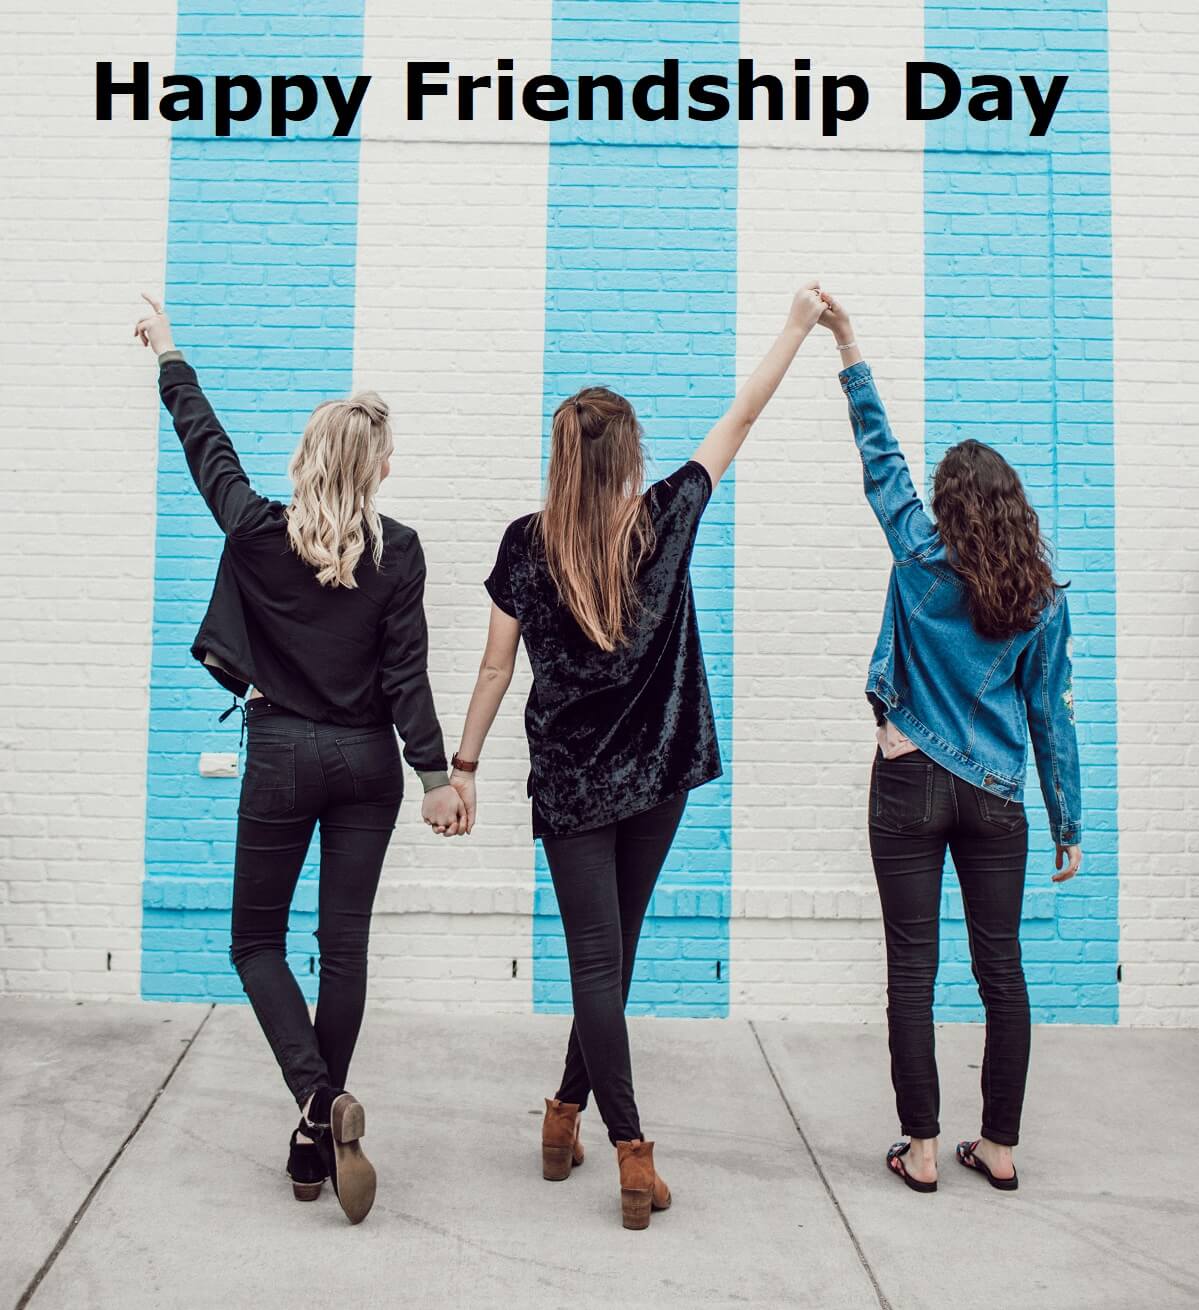 Happy Friendship Day Image for Best Friends